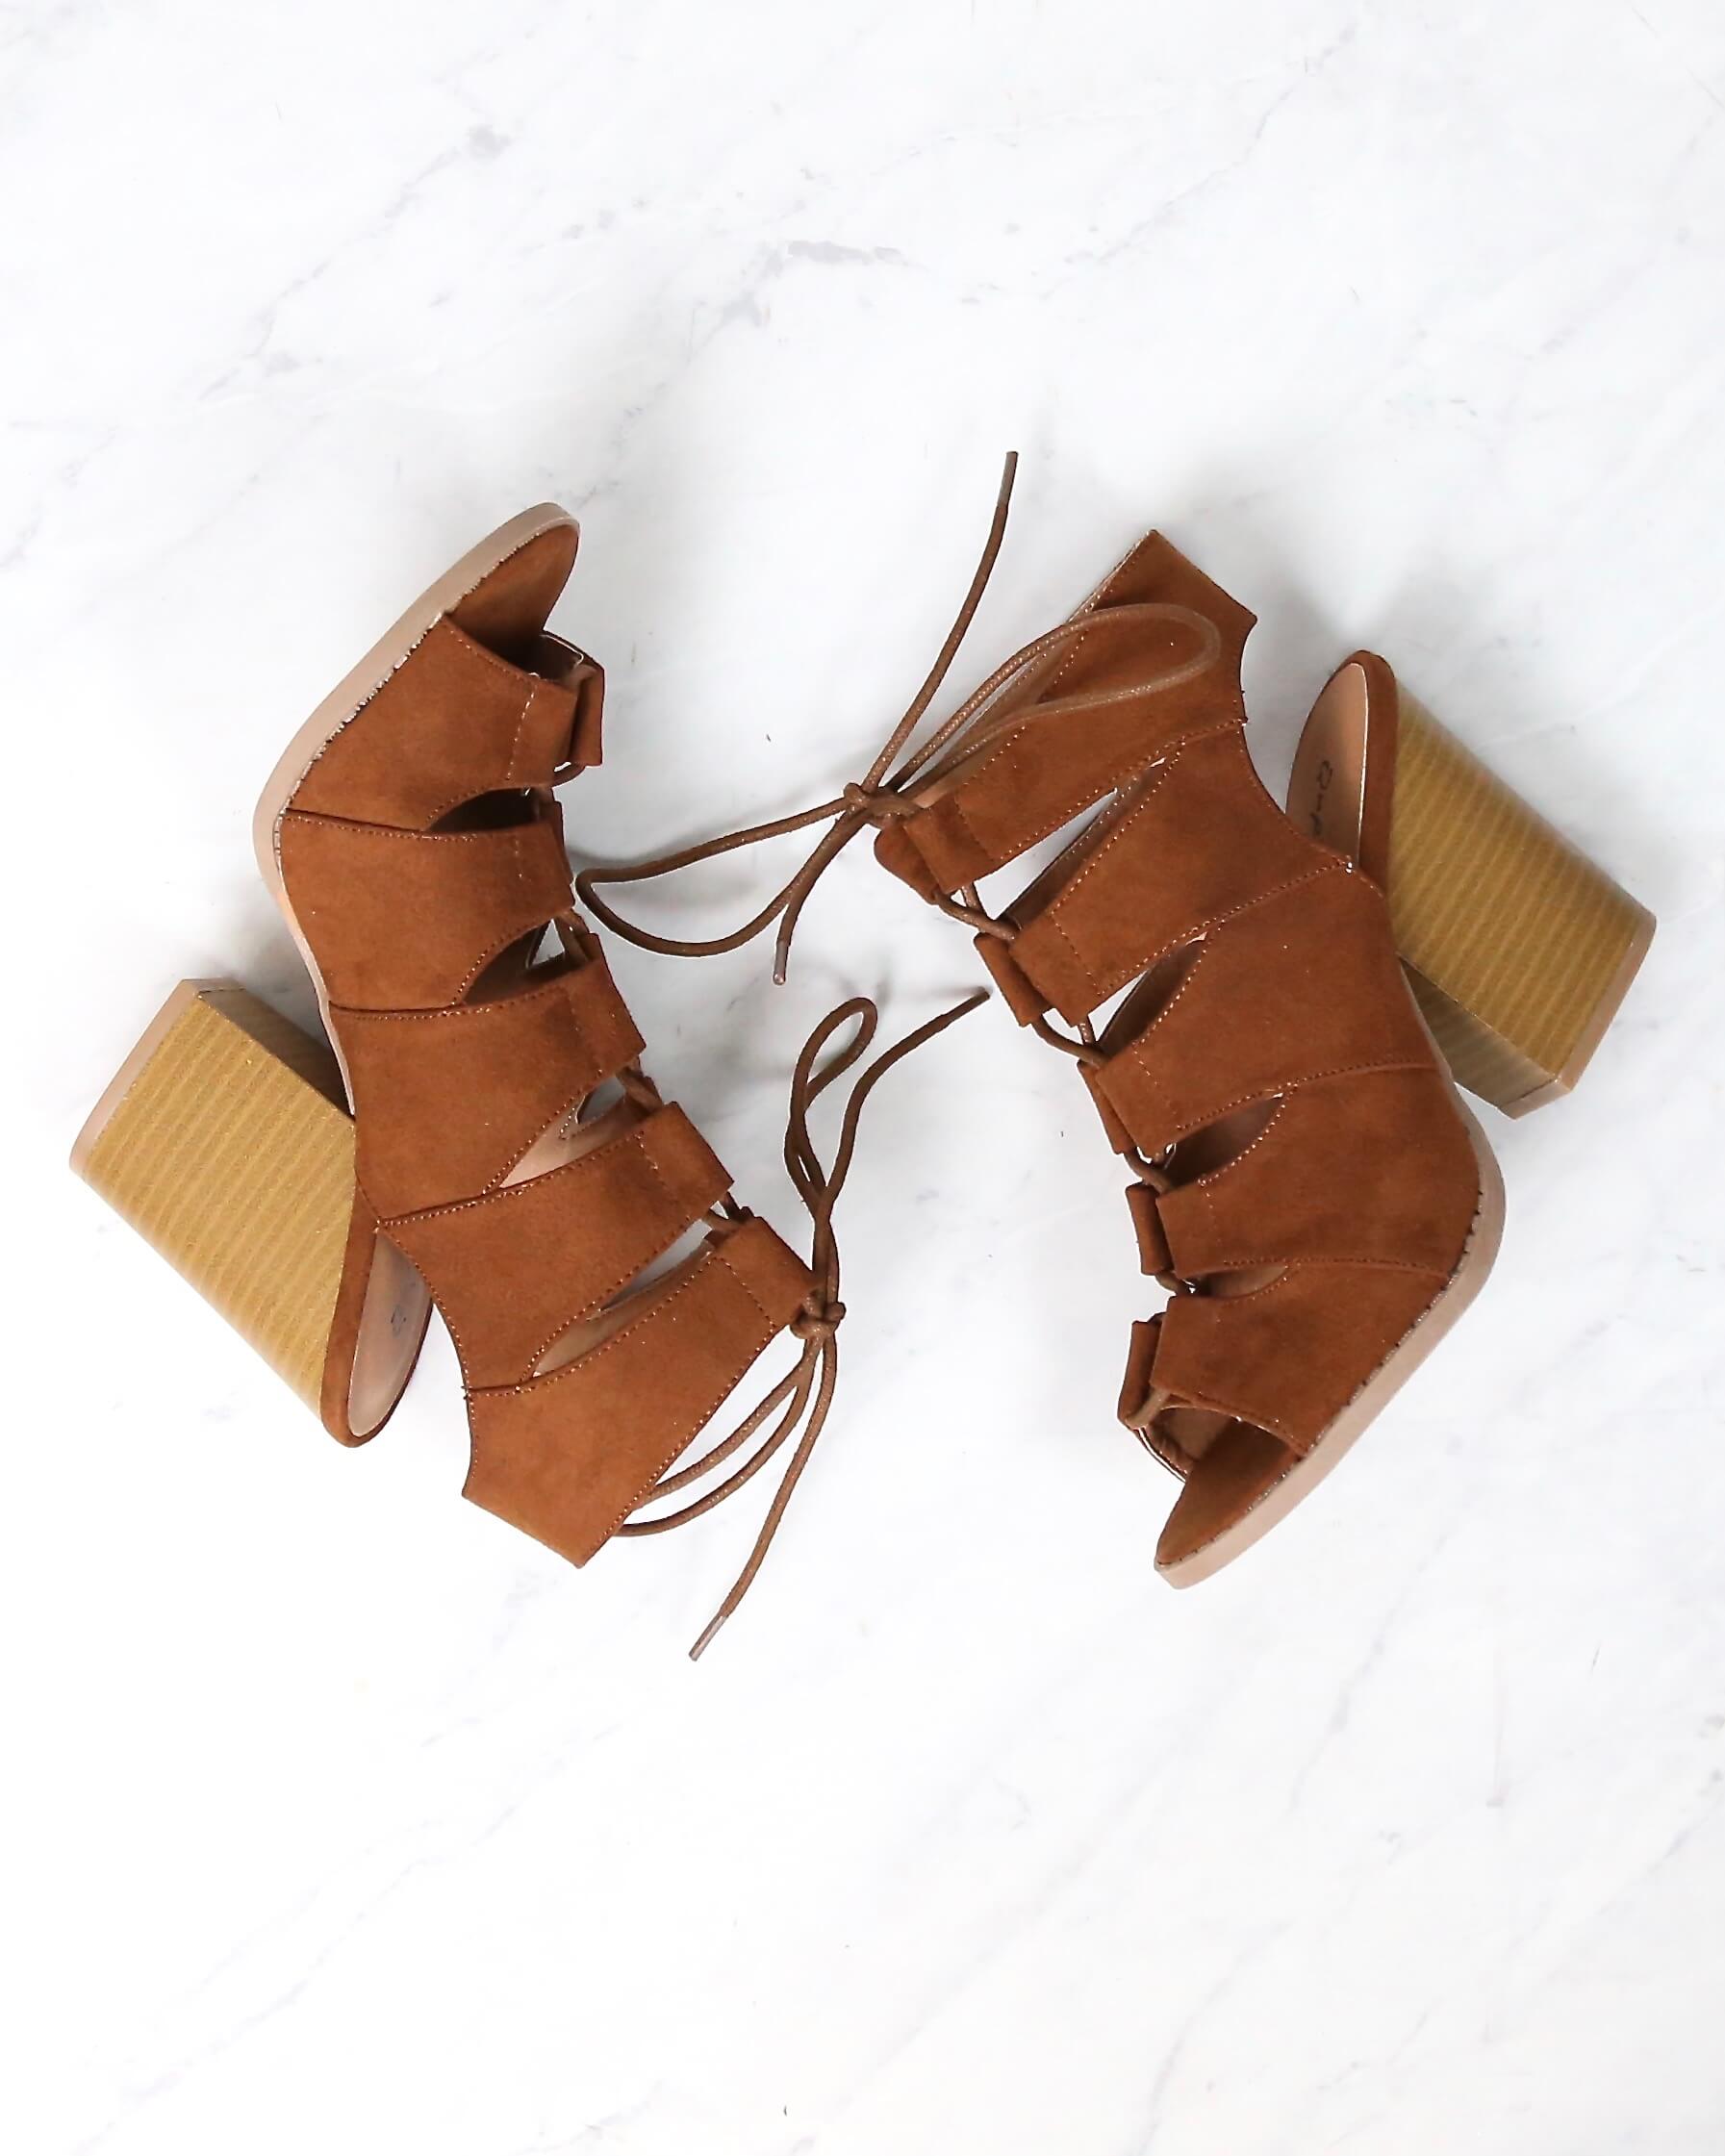 summer nights cut out laced up block heel sandals qupid barnes-01a ...